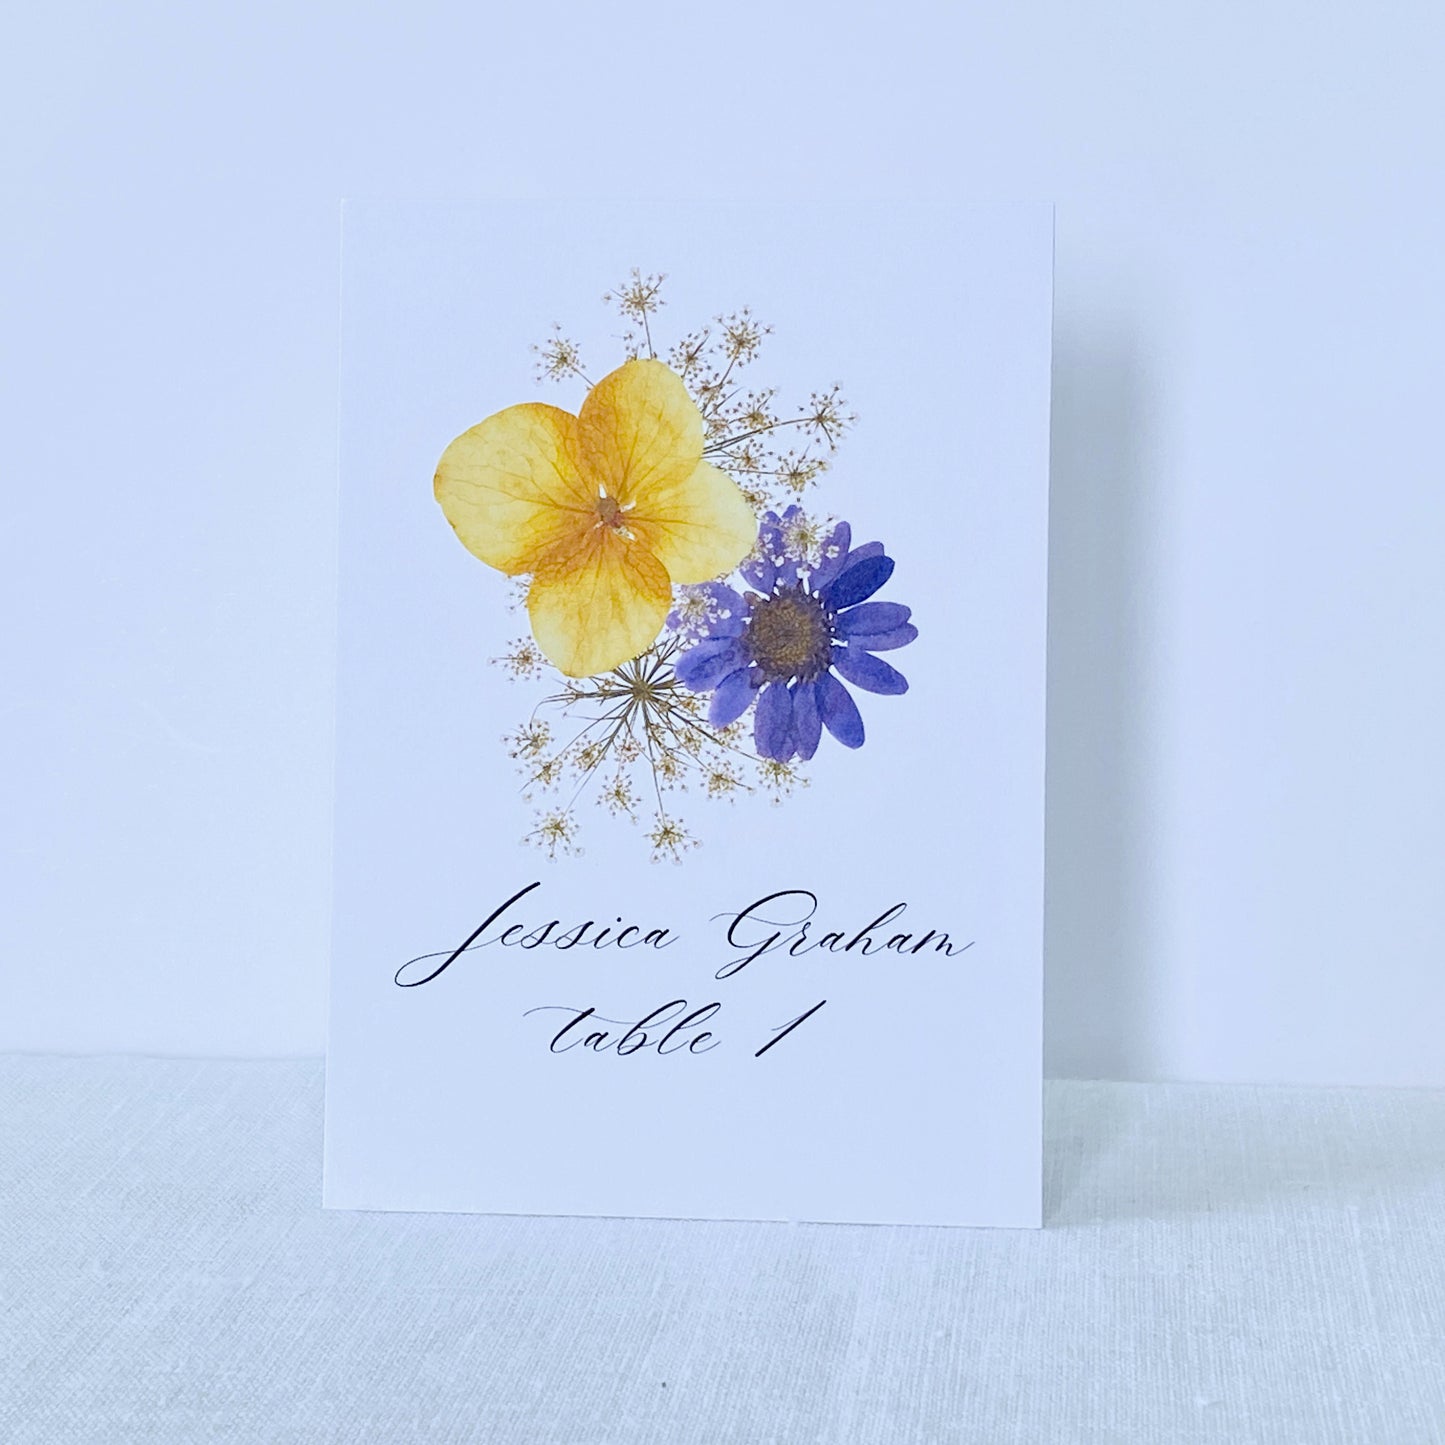 Place Cards with Pressed Flower Illustrations for Weddings, Showers, and Dinner Parties